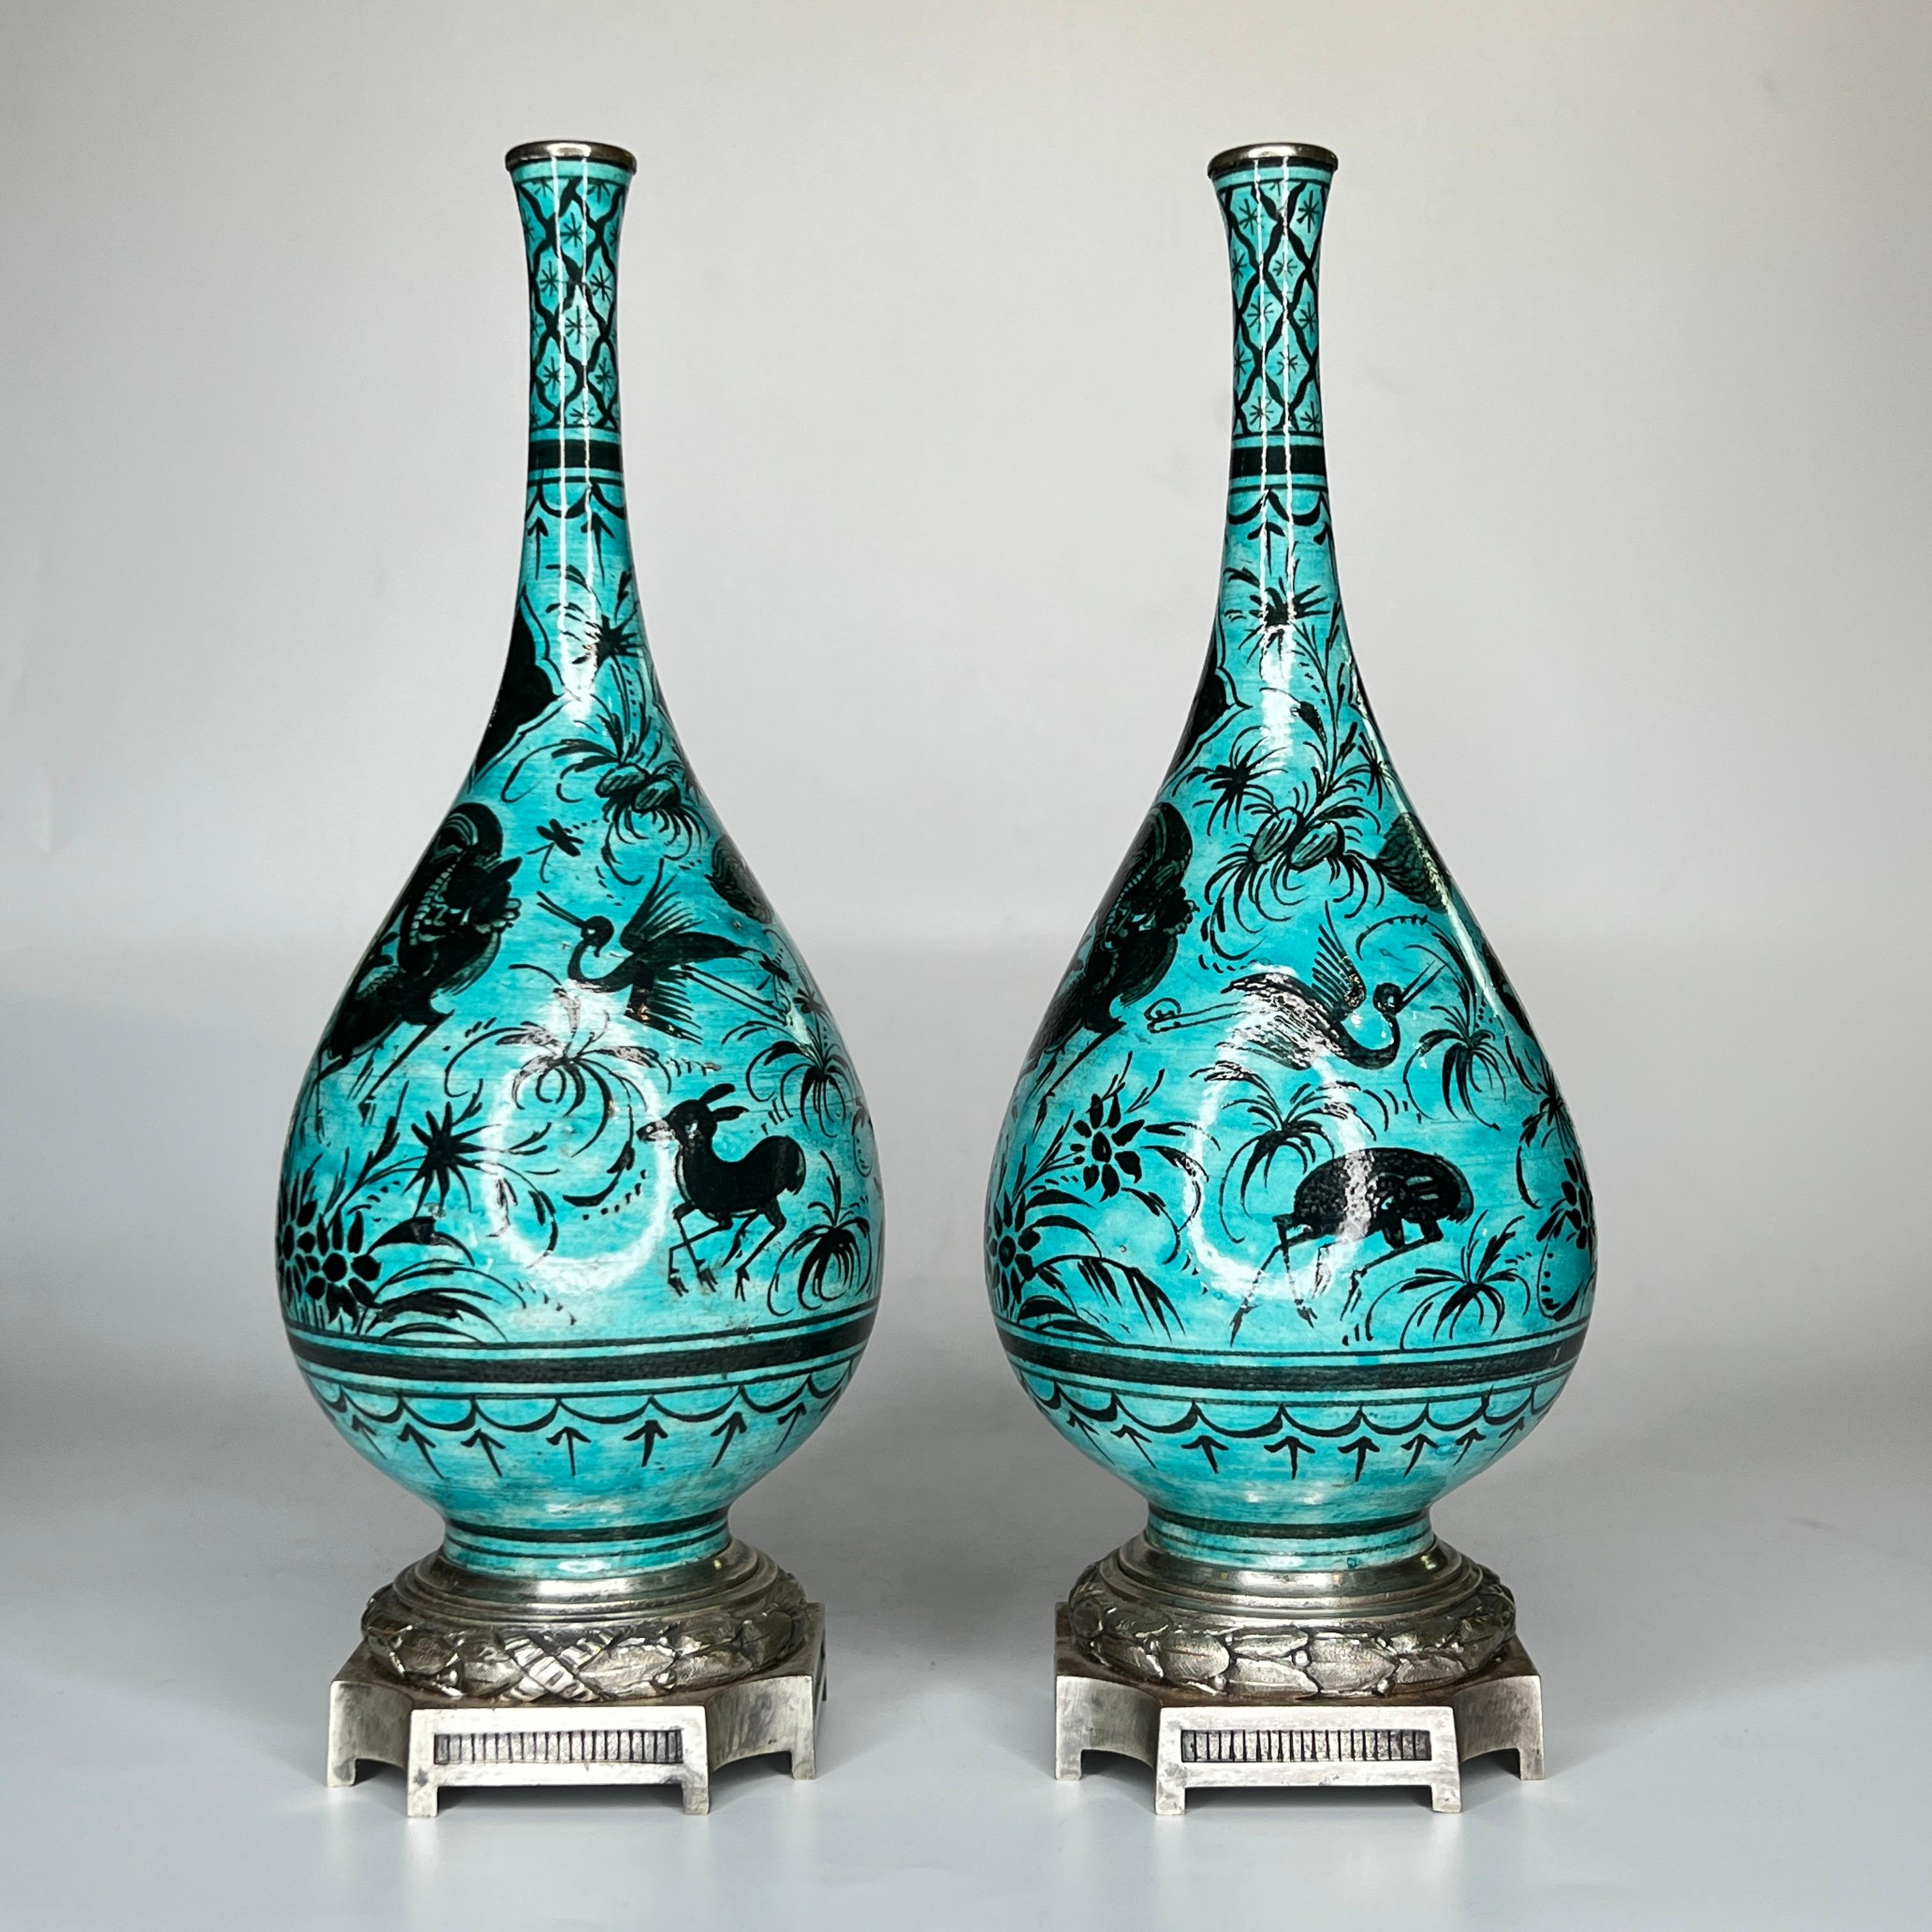 Our pair of Persian ware ceramic bottle vases in the 17th century Iznik style, attributed to Samson et Cie, circa 1870-1890, are decorated with the figures of lions or panthers attacking deer, with cranes and foliage on a turquoise ground. Mounted